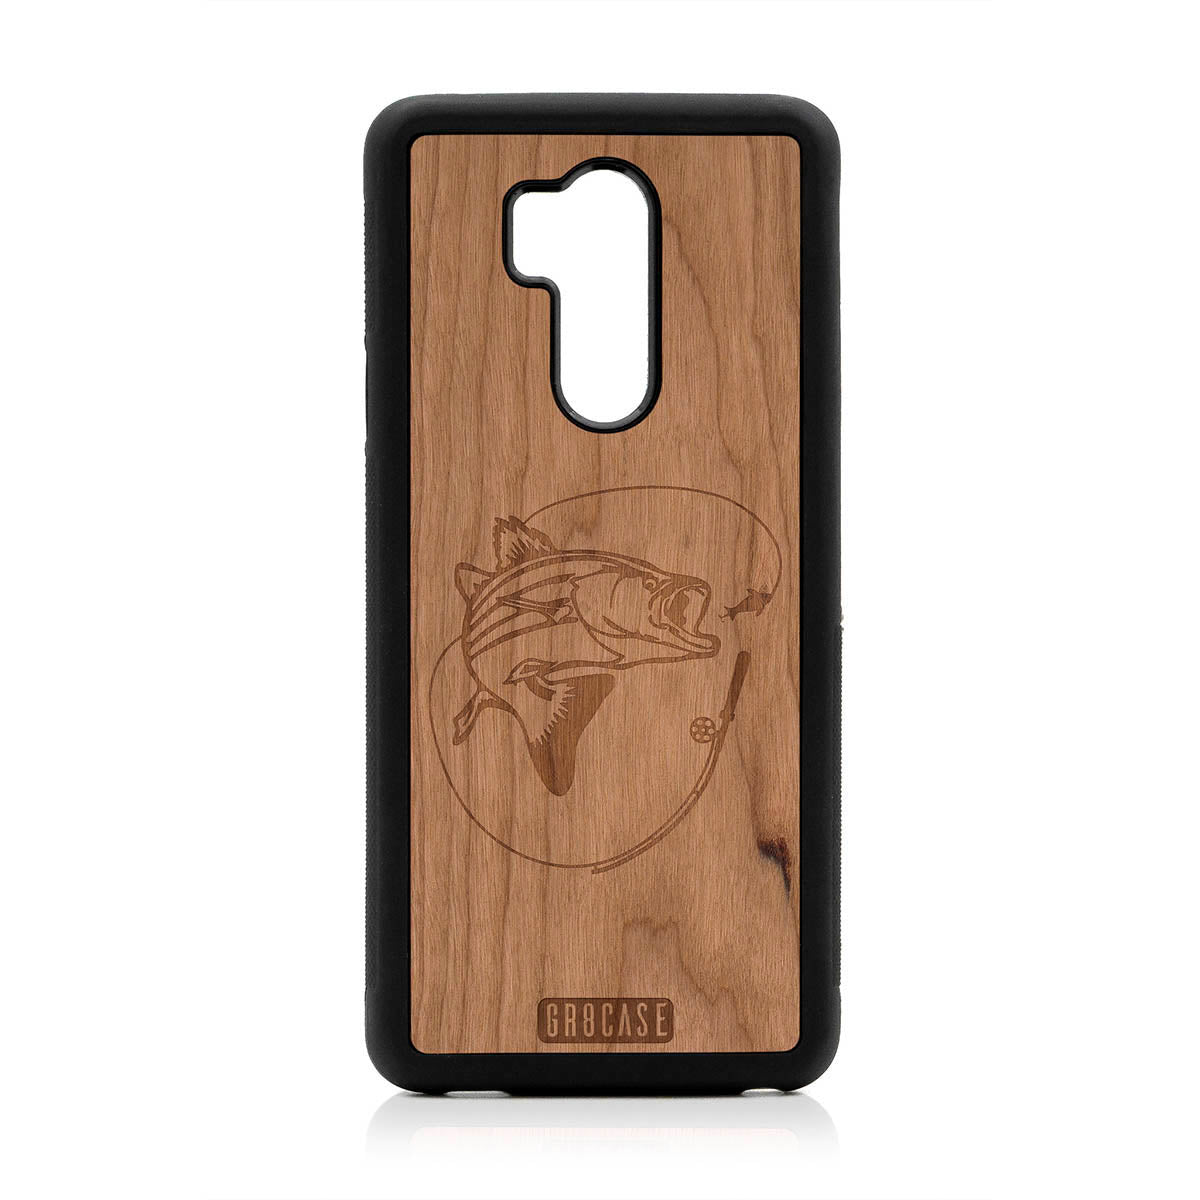 Fish and Reel Design Wood Case For LG G7 ThinQ by GR8CASE